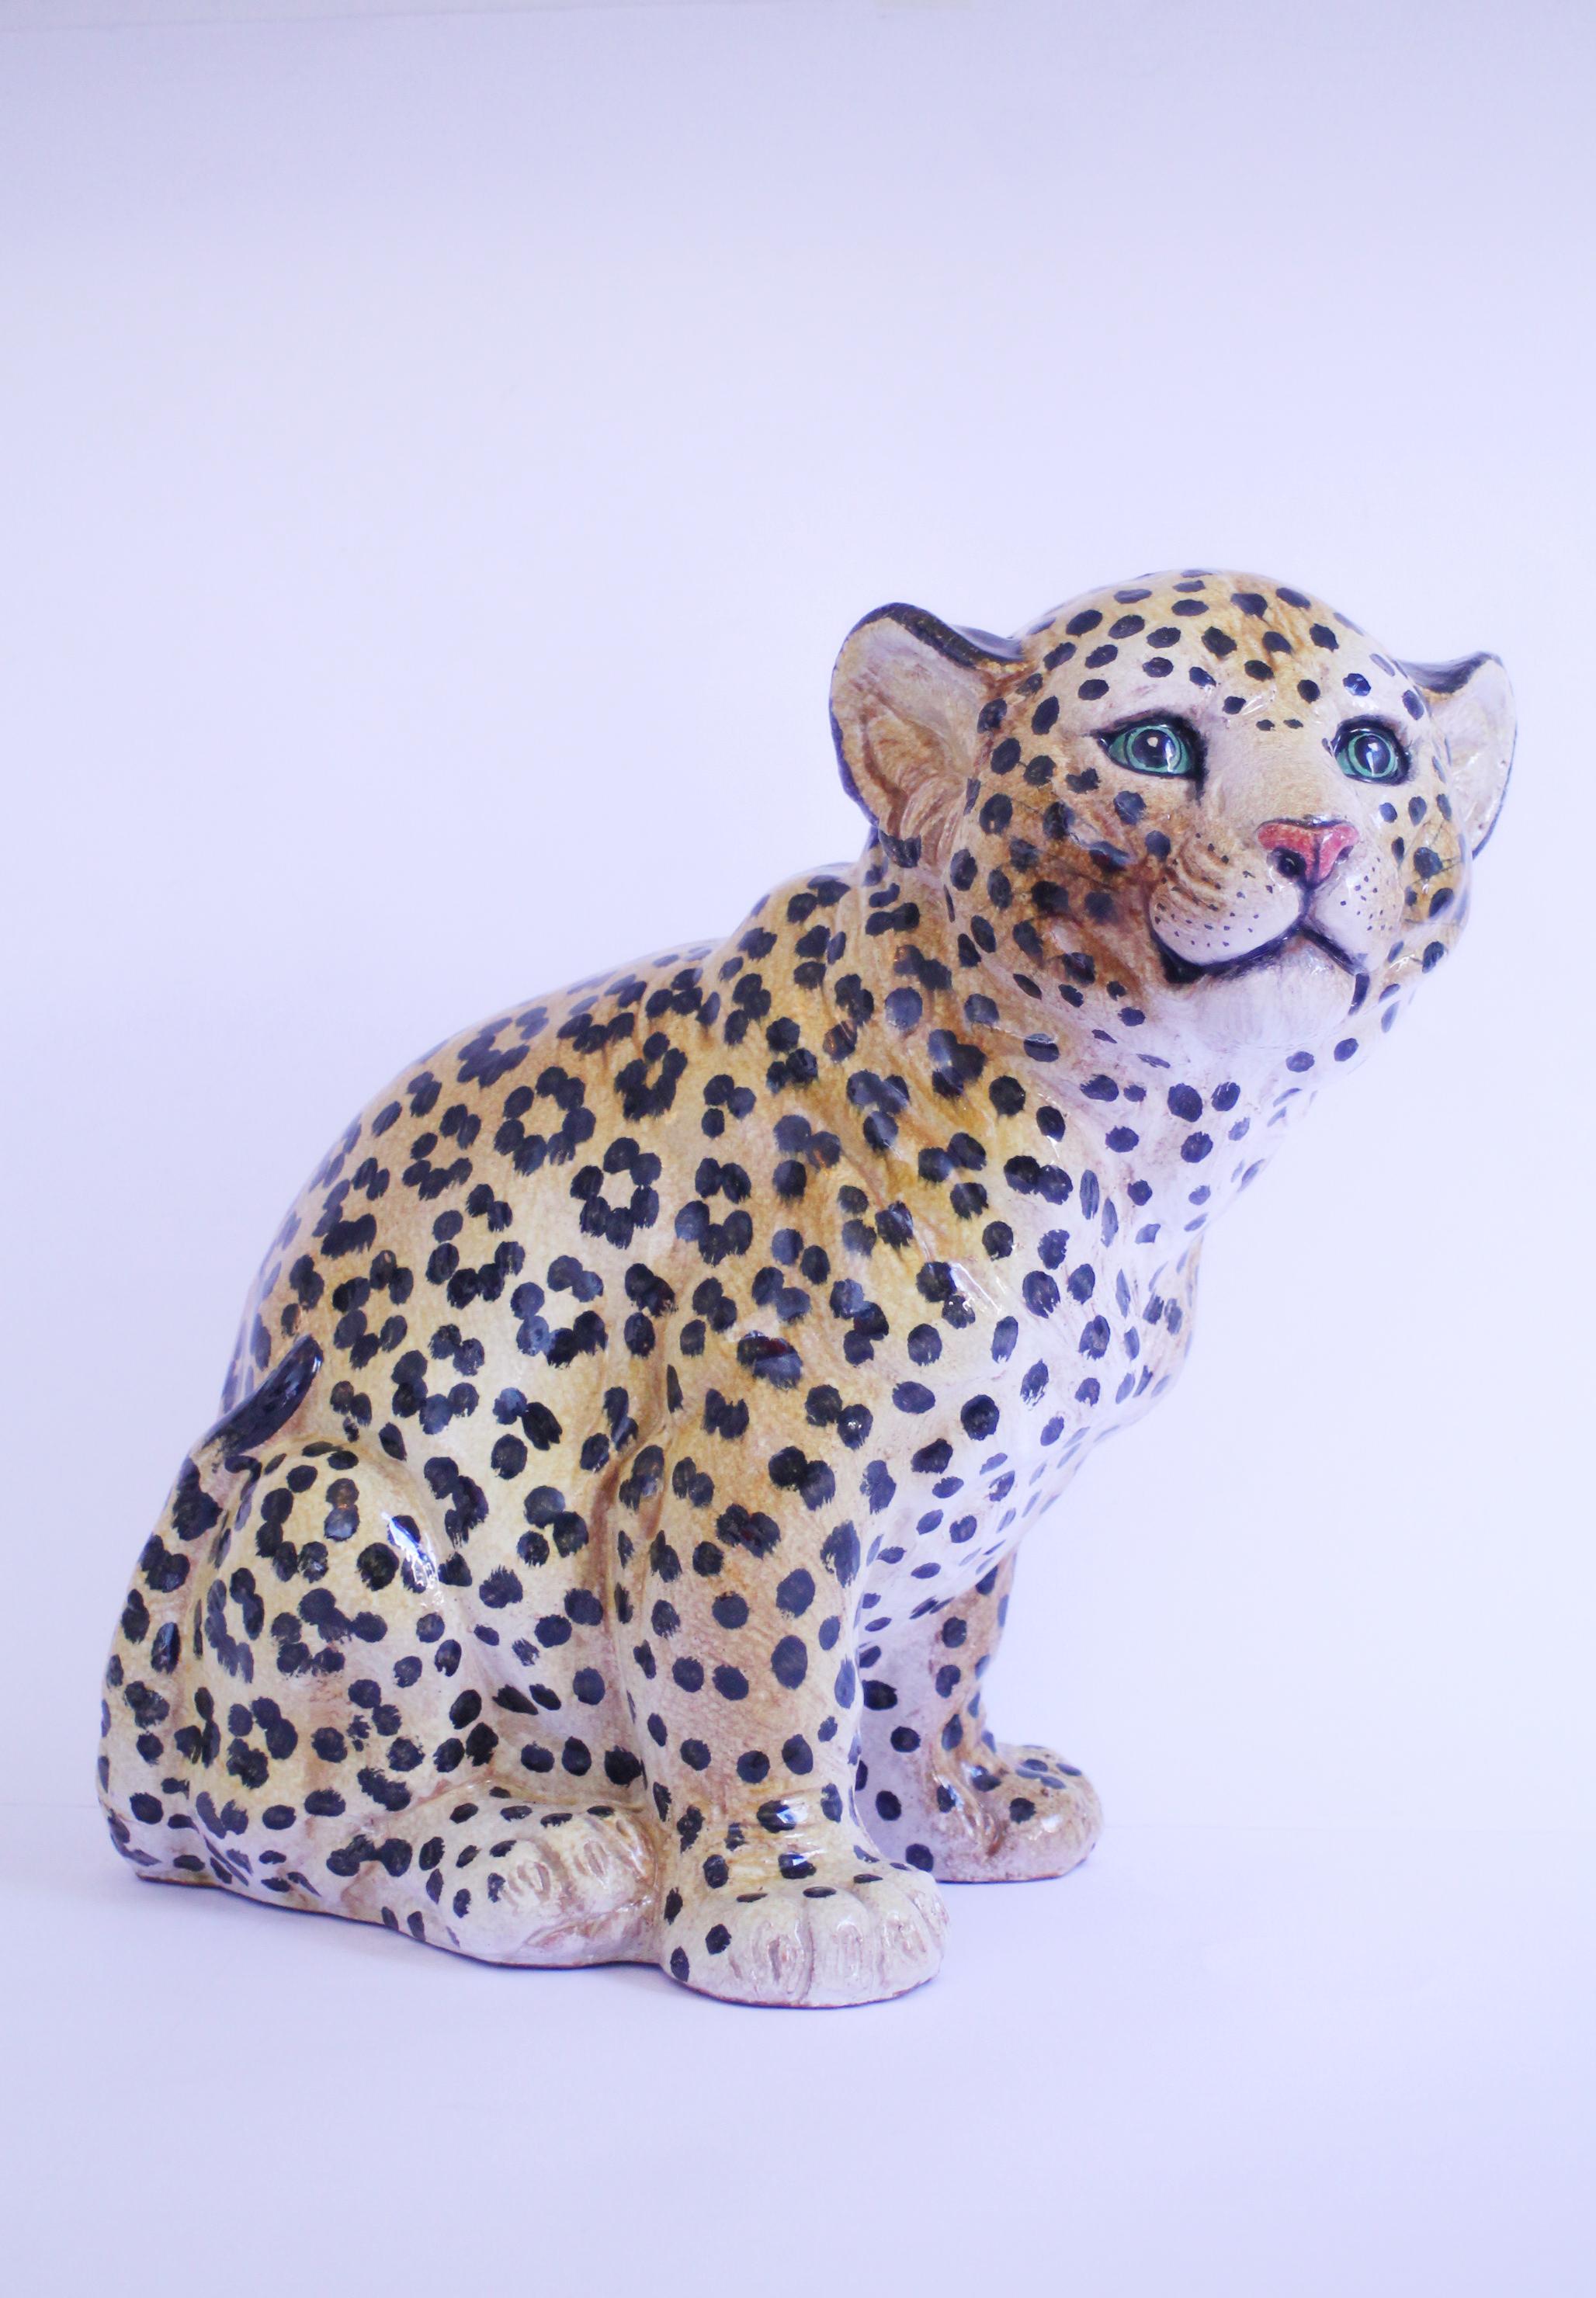 1950s hand-made Italian Majolica Leopard cub. Made in Italy!

Handcrafted + hand painted (see bottom pics)
Dimensions: 43 height x 43 x 34 cms (17x17x13in.)
Weight: 10kgs (21 pounds ca.)
Condition: Gently used, near mint with no visible cracks or